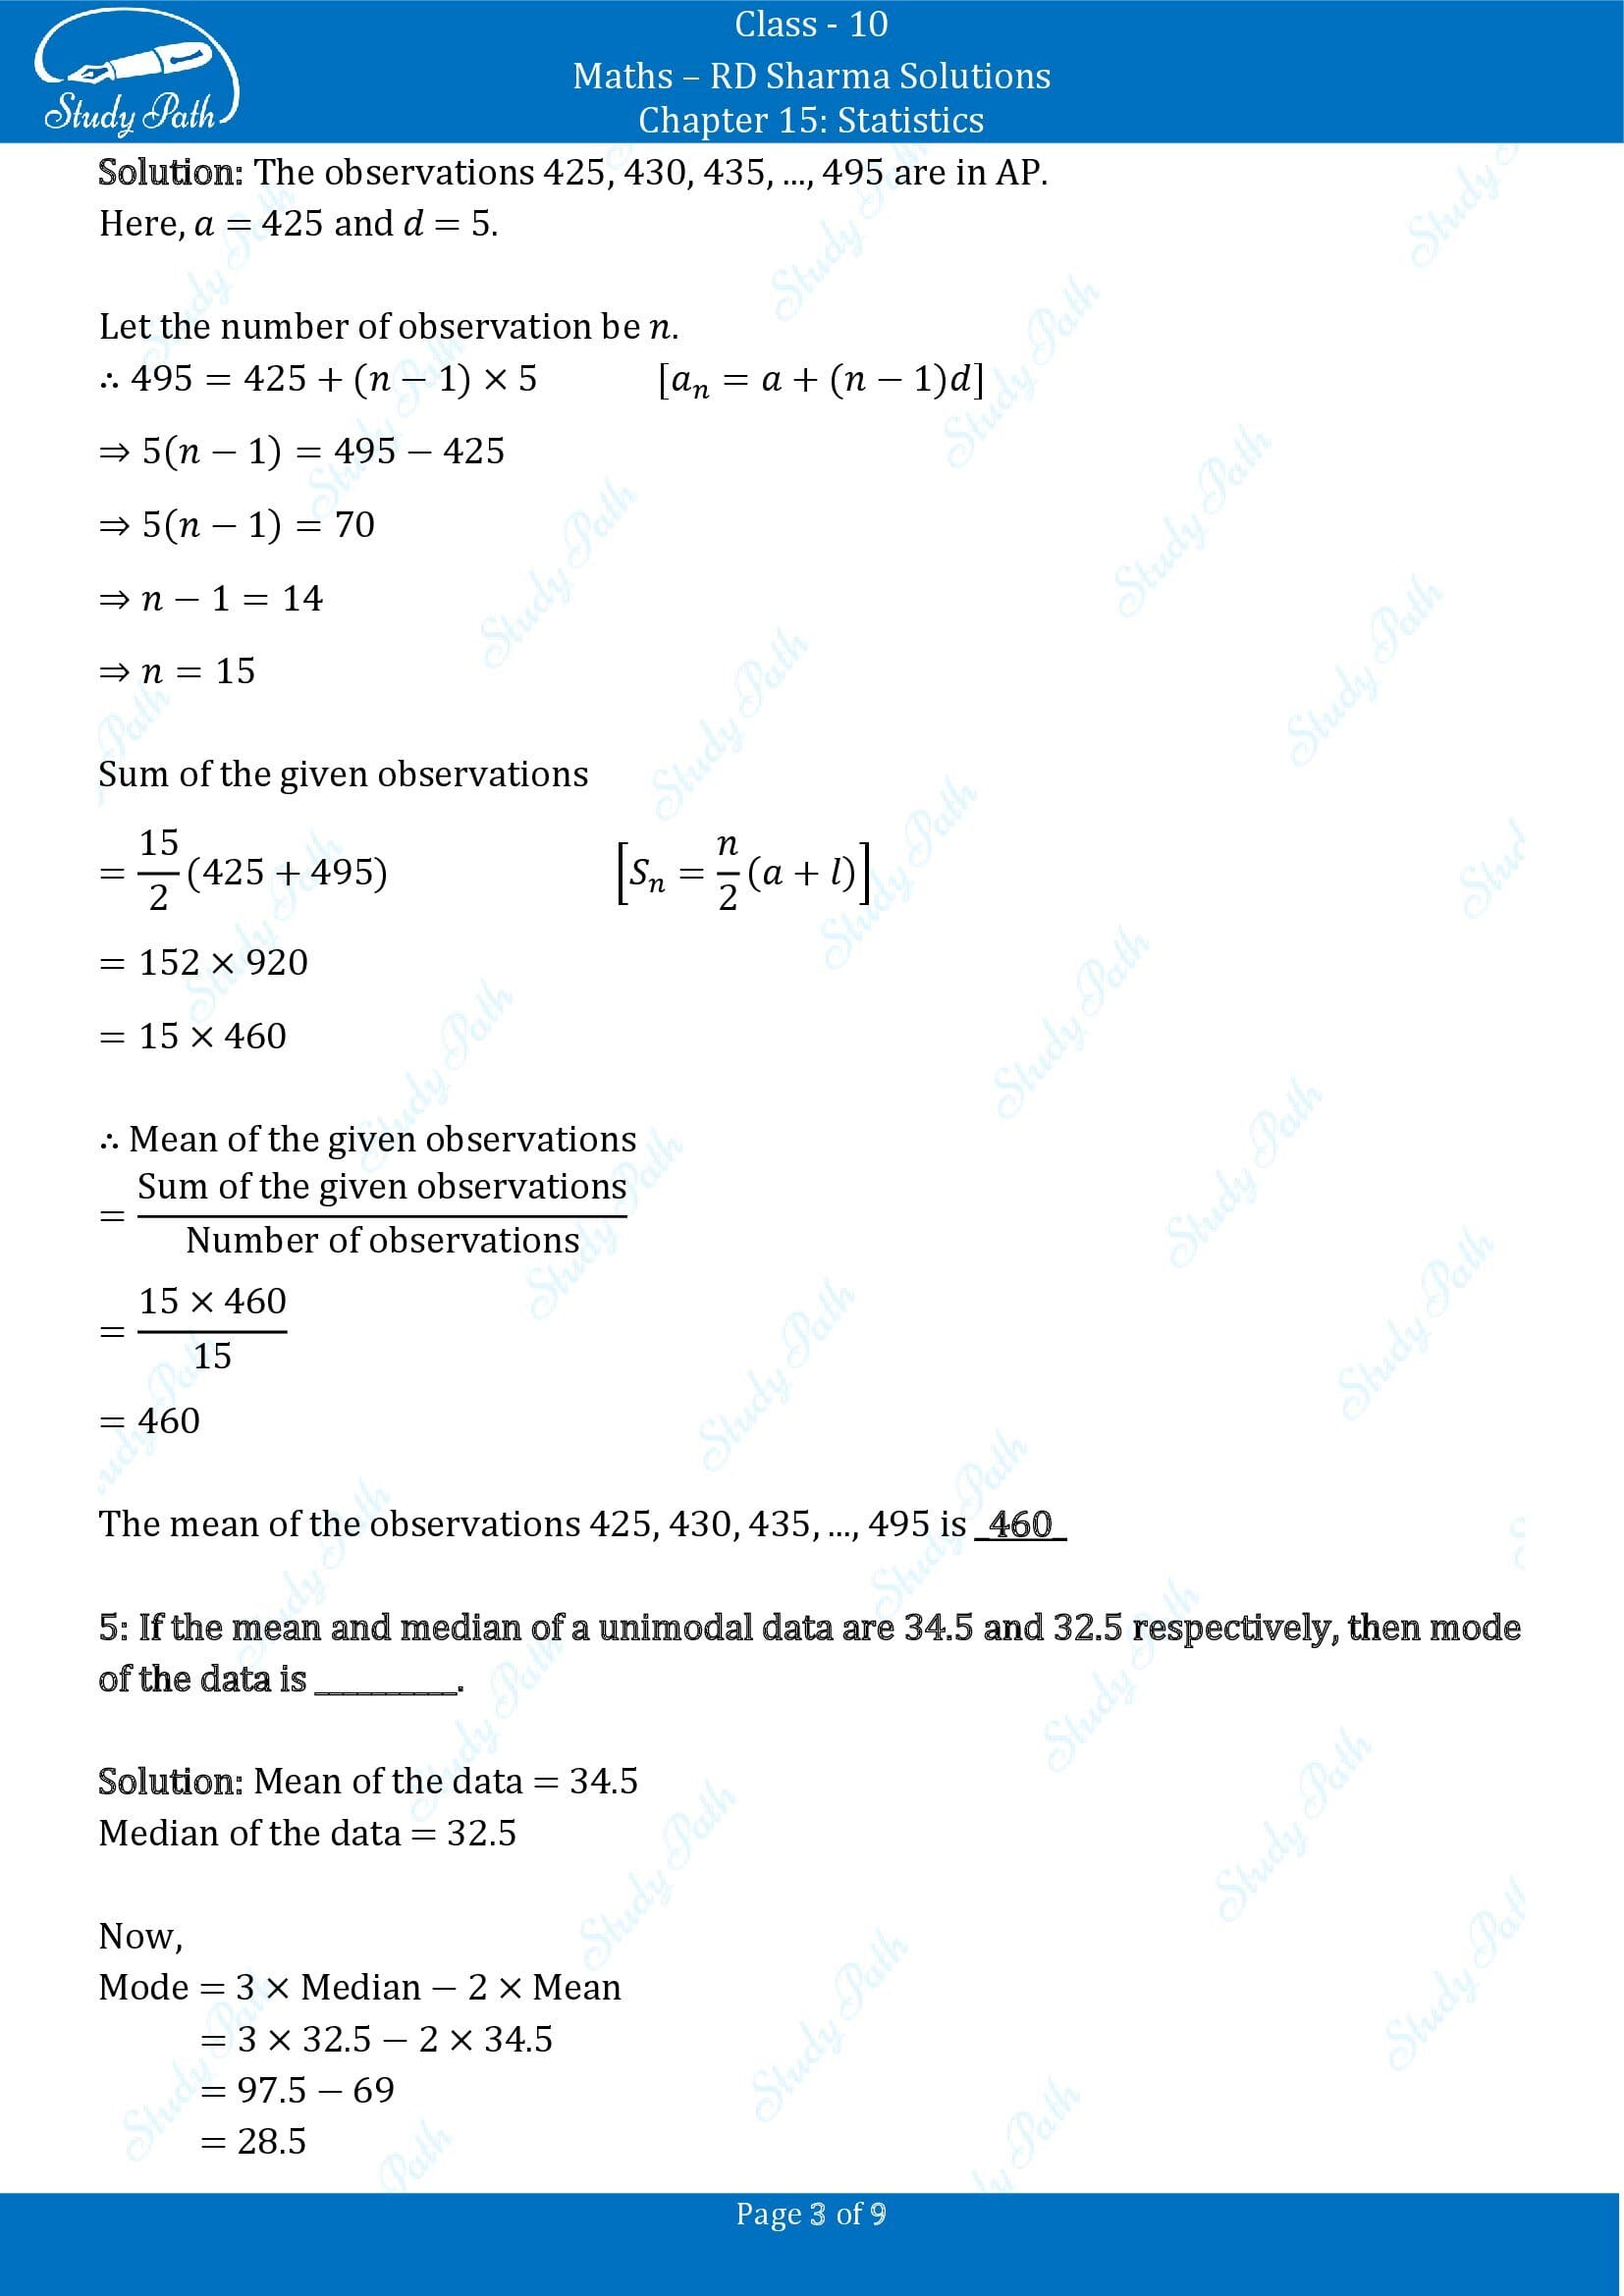 RD Sharma Solutions Class 10 Chapter 15 Statistics Fill in the Blank Type Questions FBQs 00003